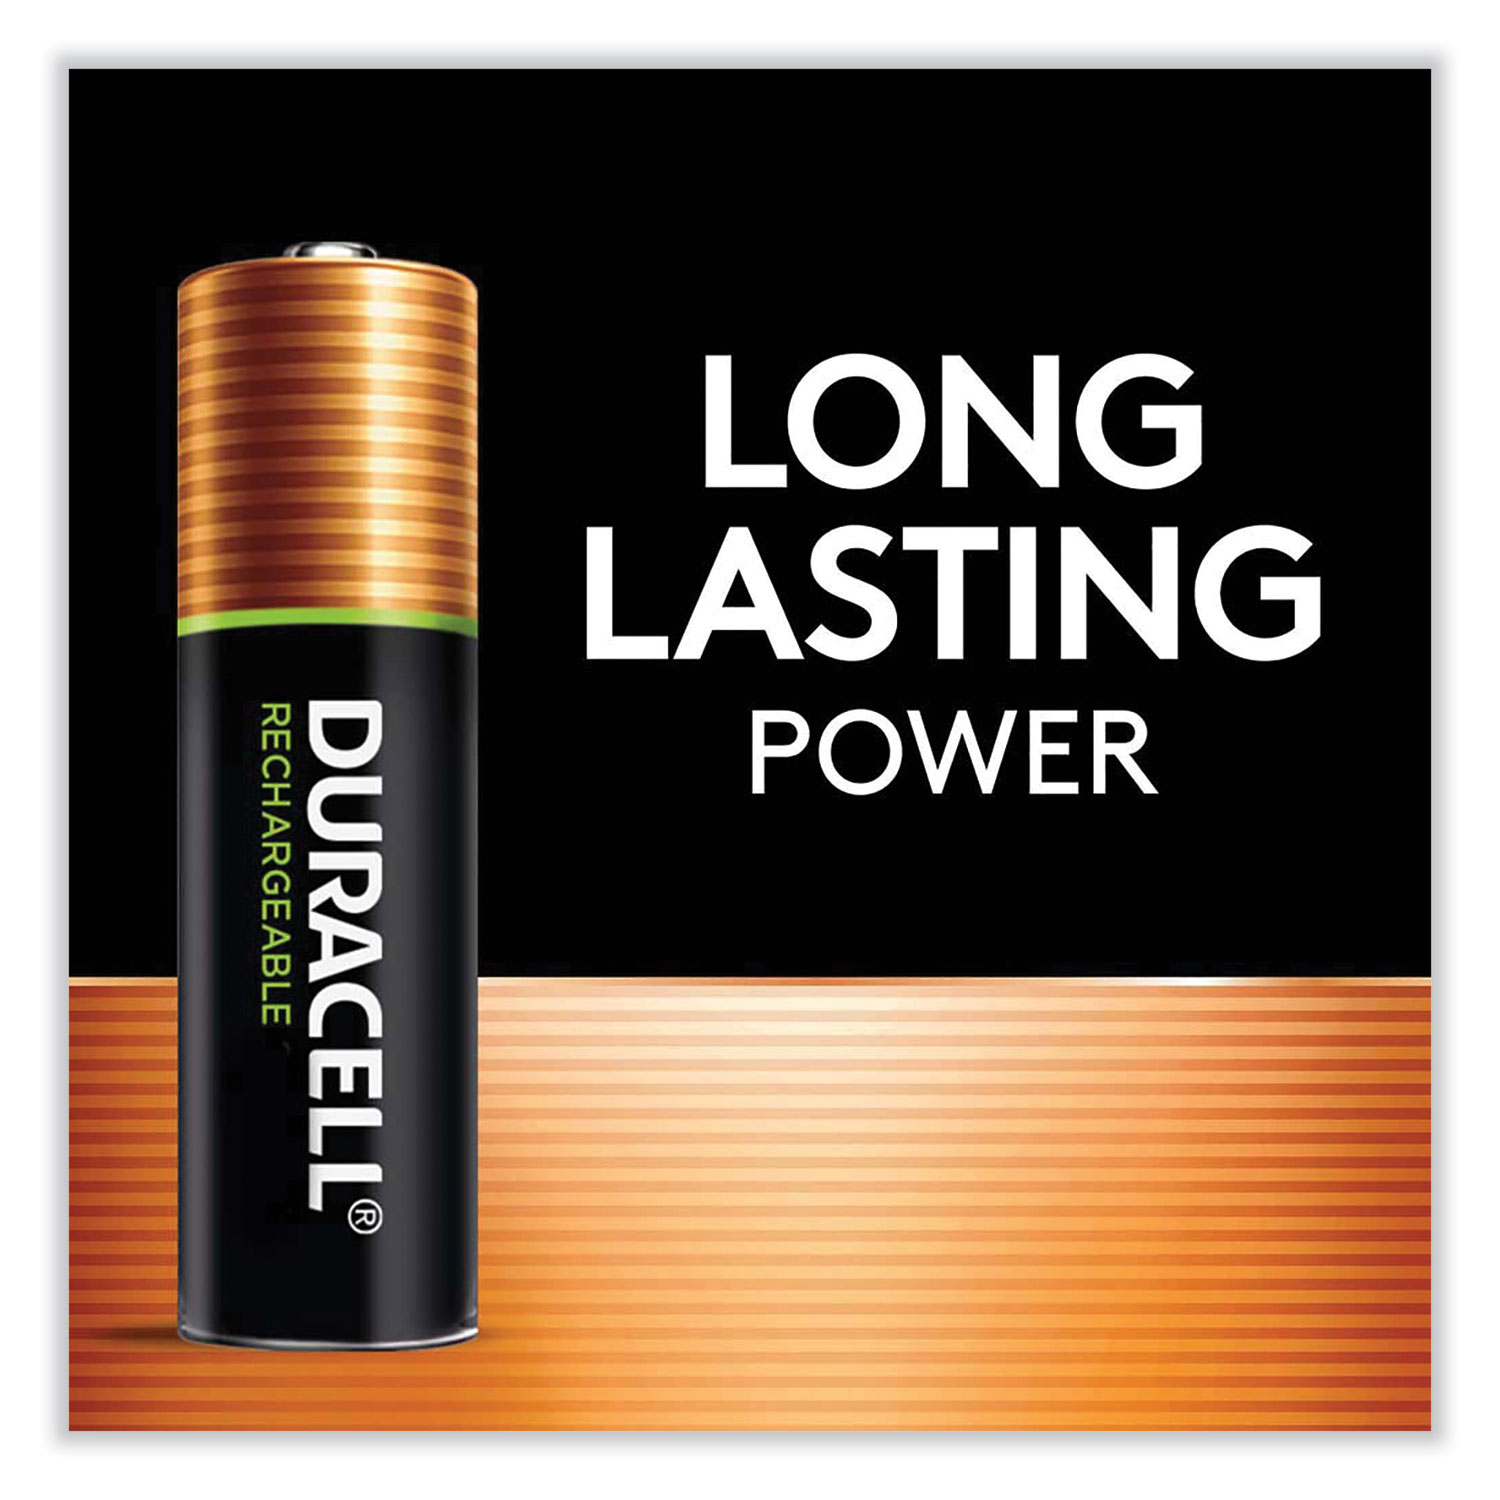 Duracell - Chargeur de Piles AA et AAA Ion Speed 4000, Piles Incluse